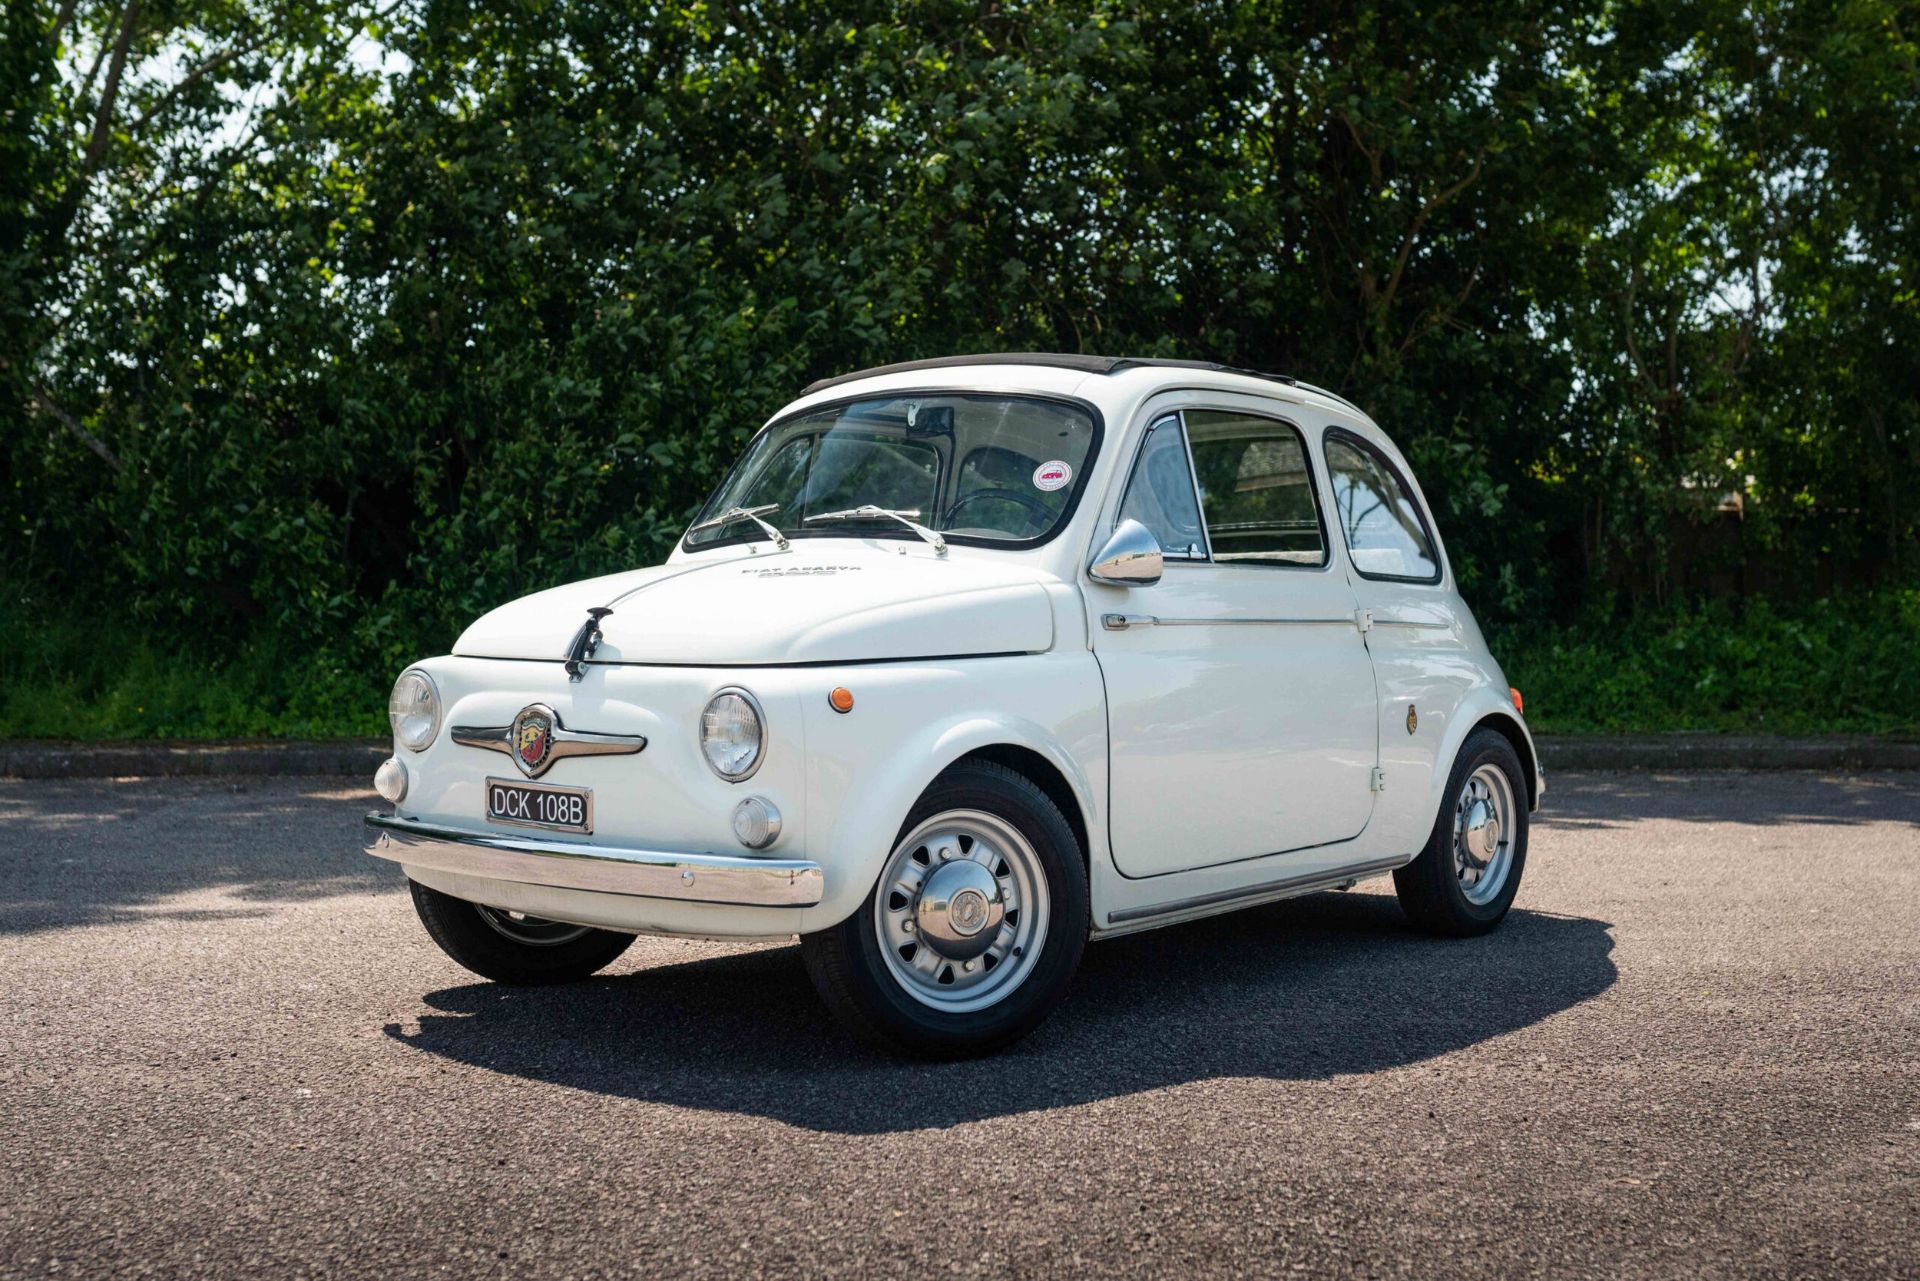 1964 FIAT ABARTH 595 Registration Number: DCK 108B Chassis Number: 110D595595 Recorded Mileage: 2, - Image 3 of 39